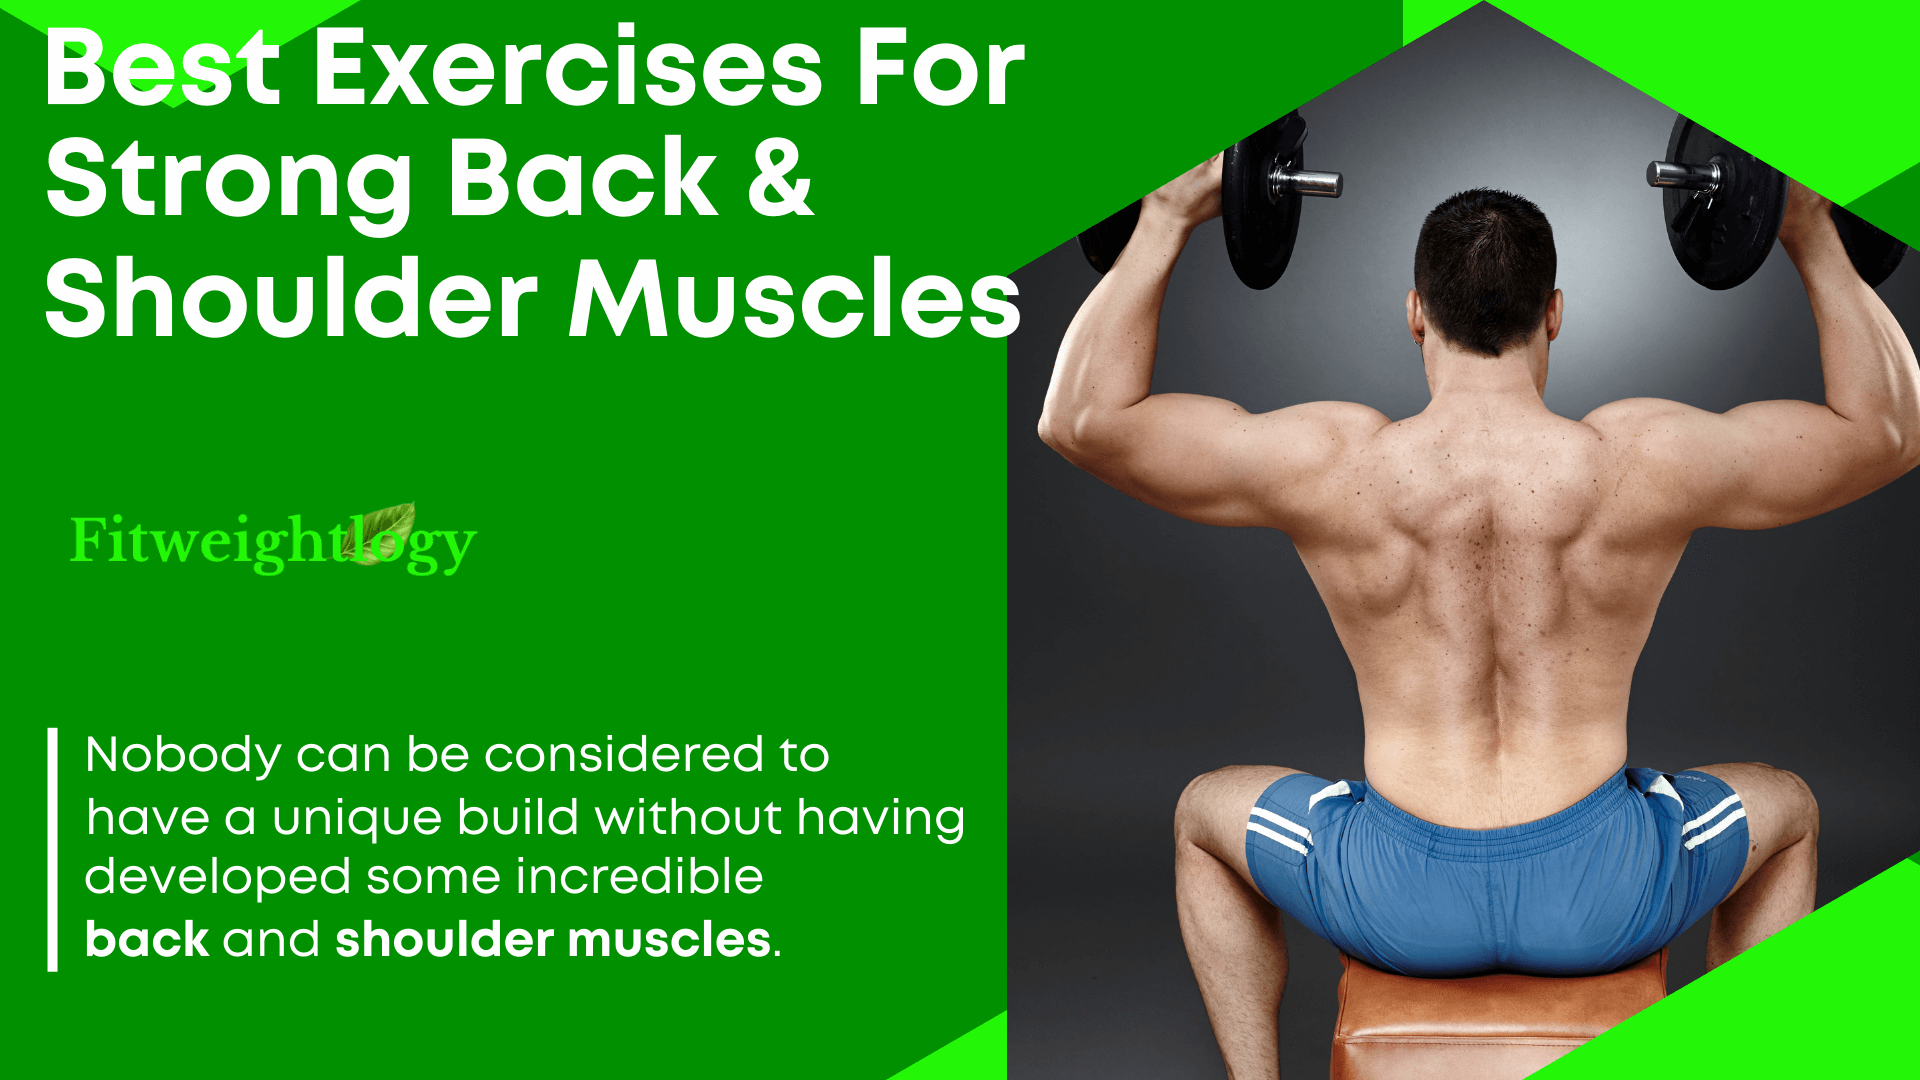 Best Exercises To Build Strong Back And Shoulder Muscles